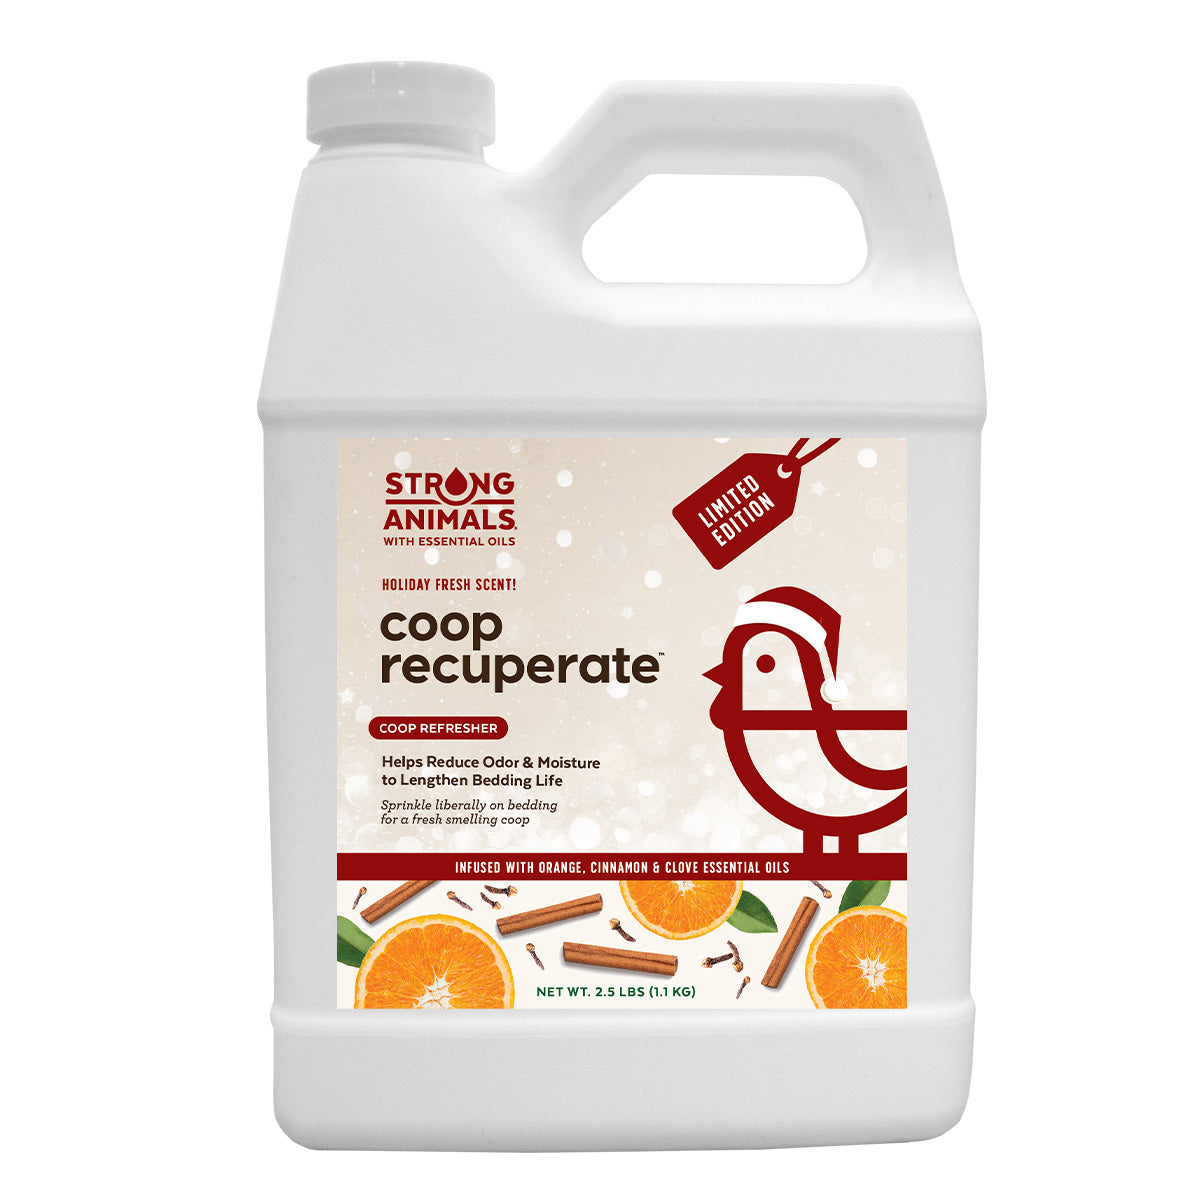 This holiday coop refresher is made with organic essential oils and diatomaceous earth